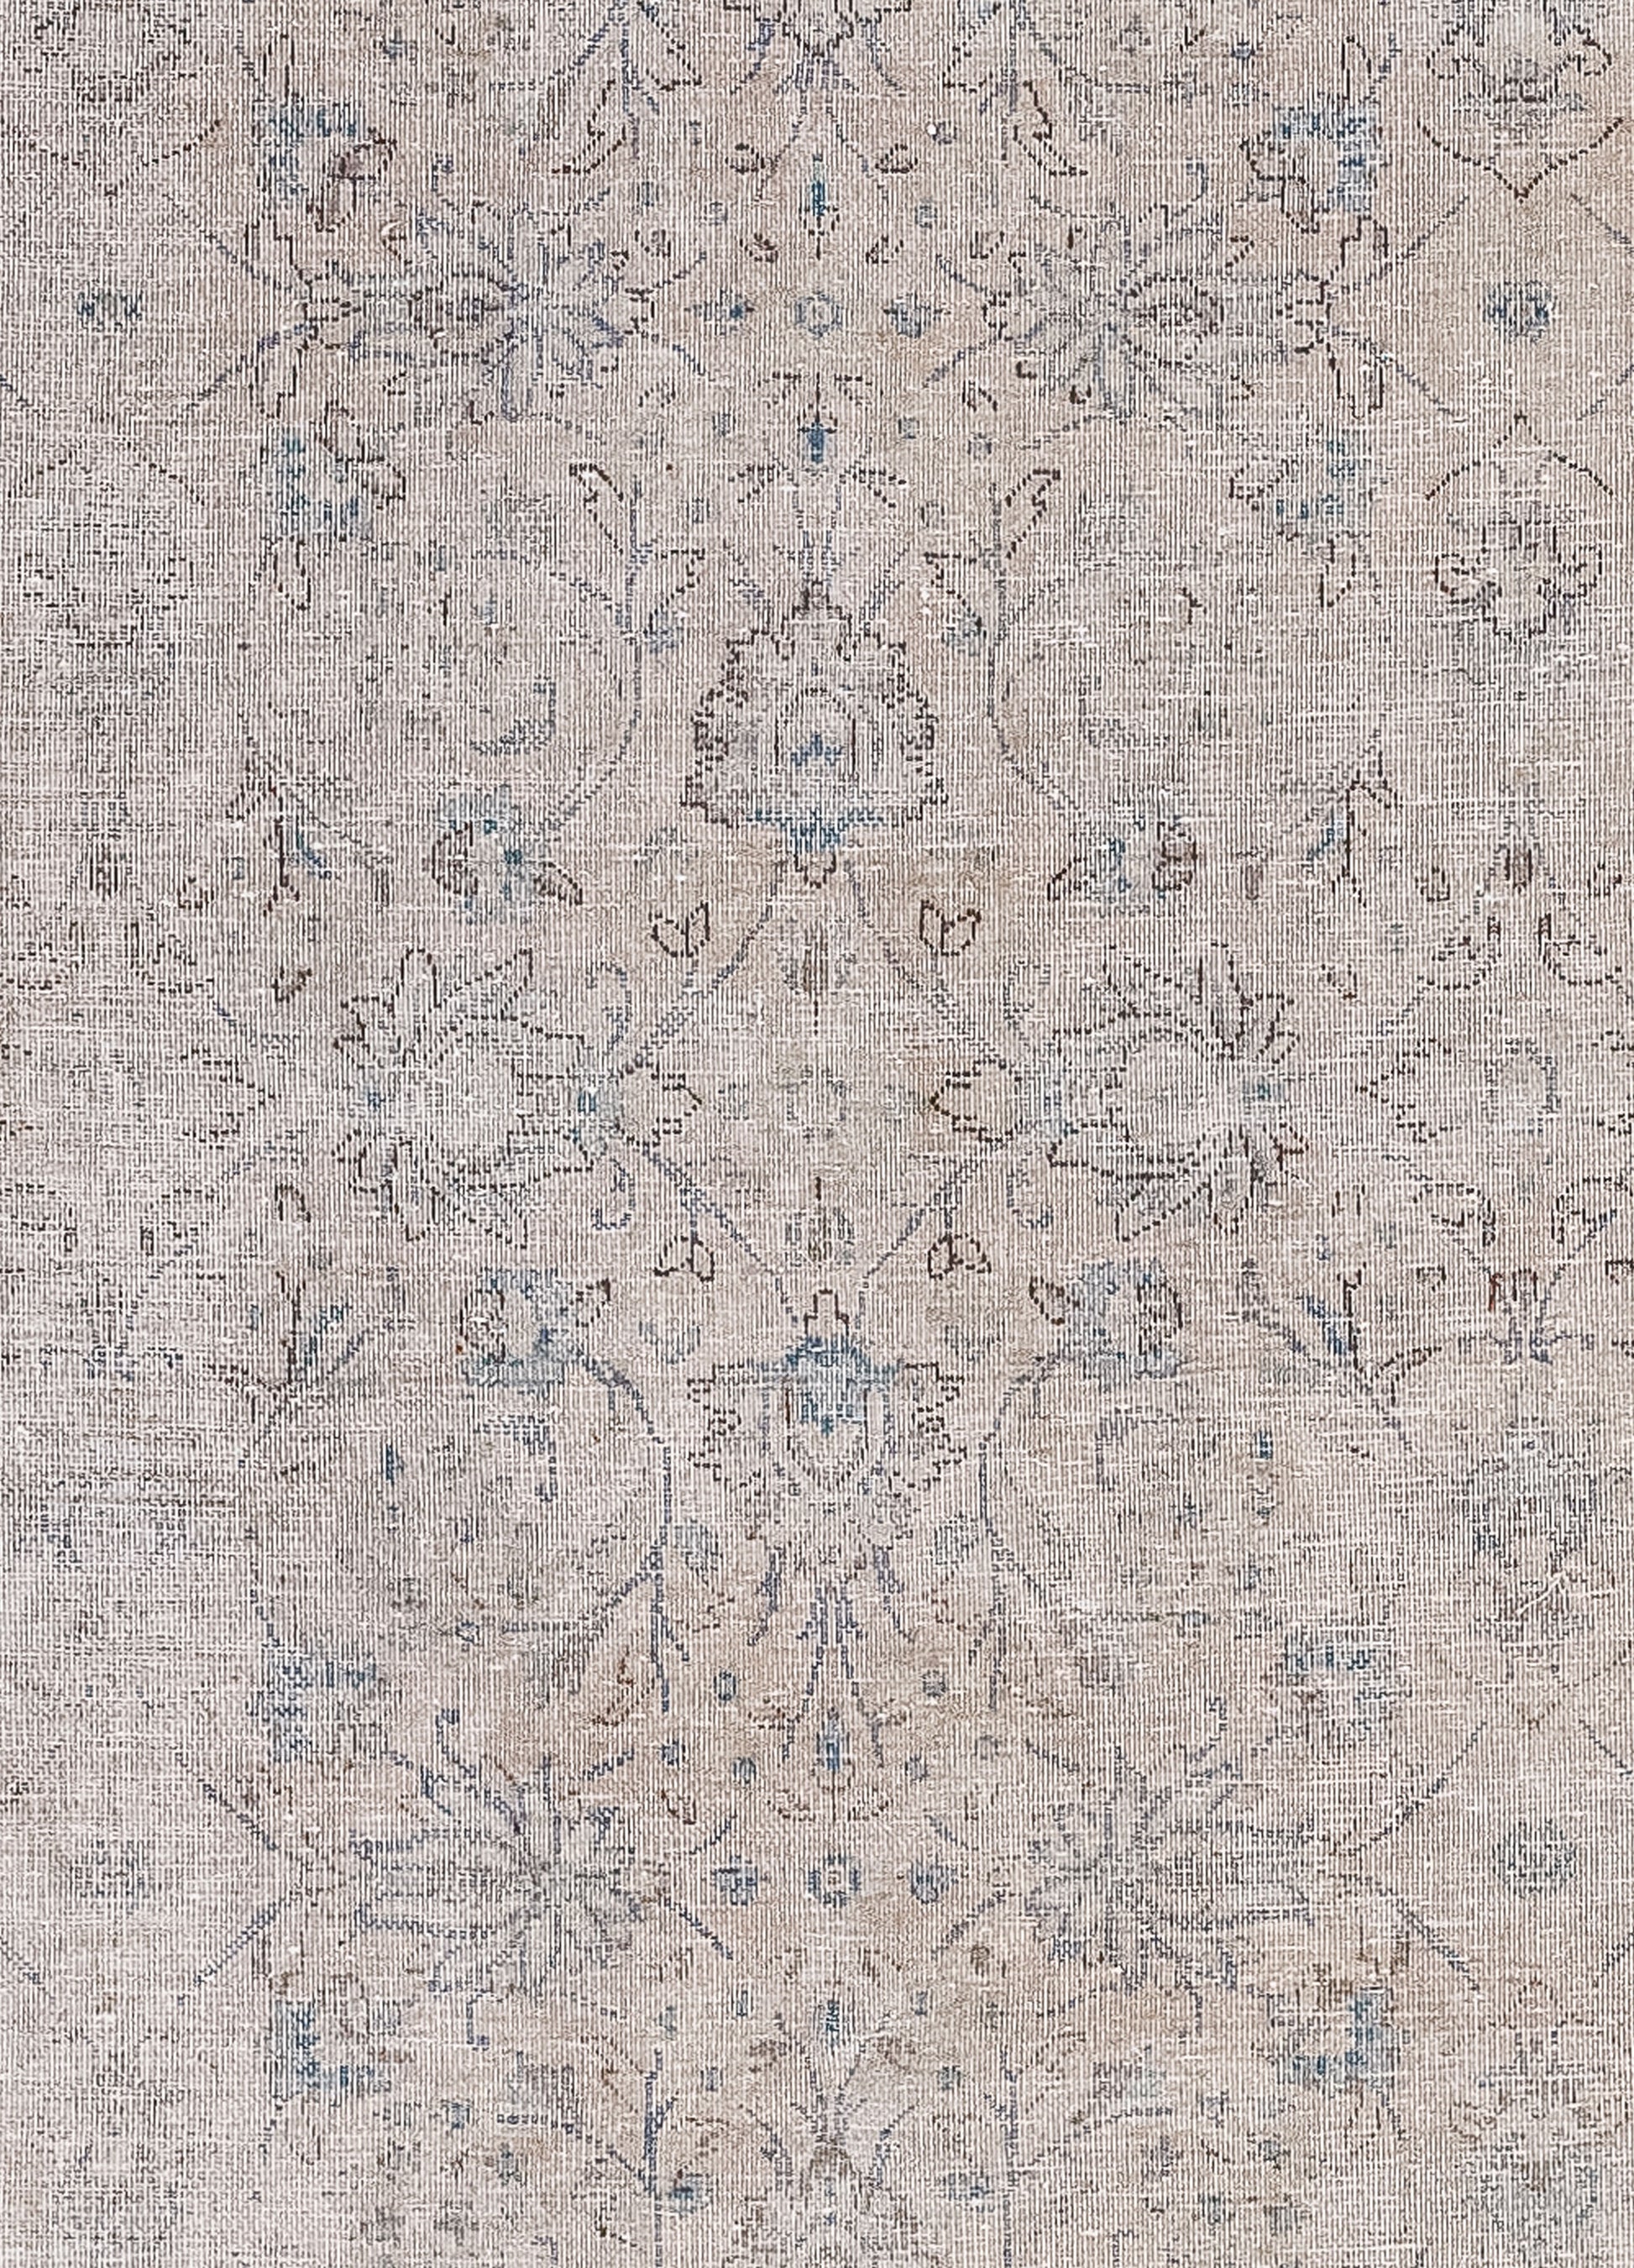 The rug has small fringes and the top and bottom. The center of the rug features a closer look at the details of the symmetrical carnation pattern.